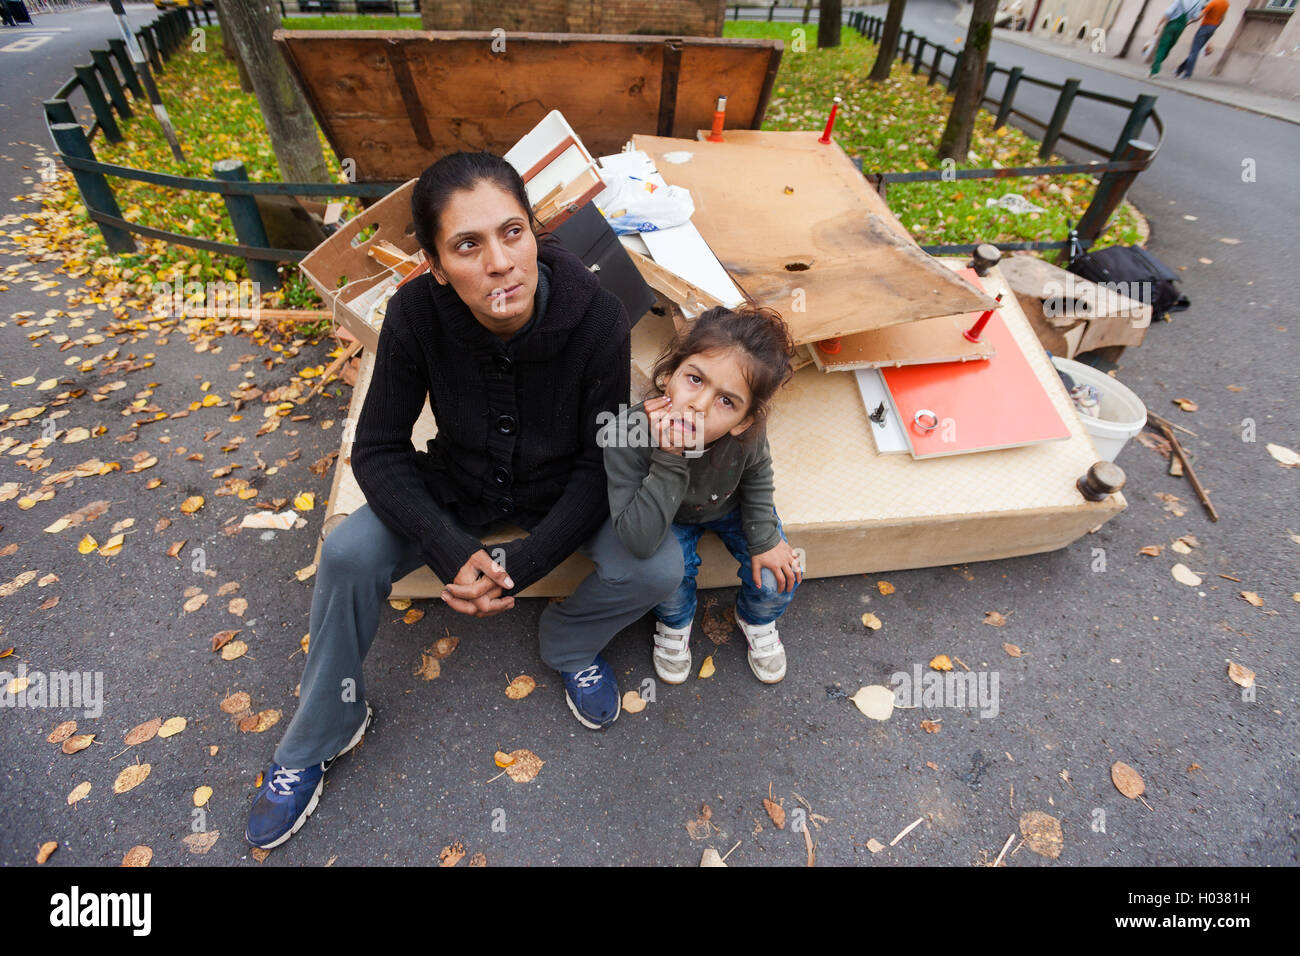 ZAGREB, CROATIA - OCTOBER 14, 2013: Roma mother and daughter sitting at the garbage dump. Stock Photo